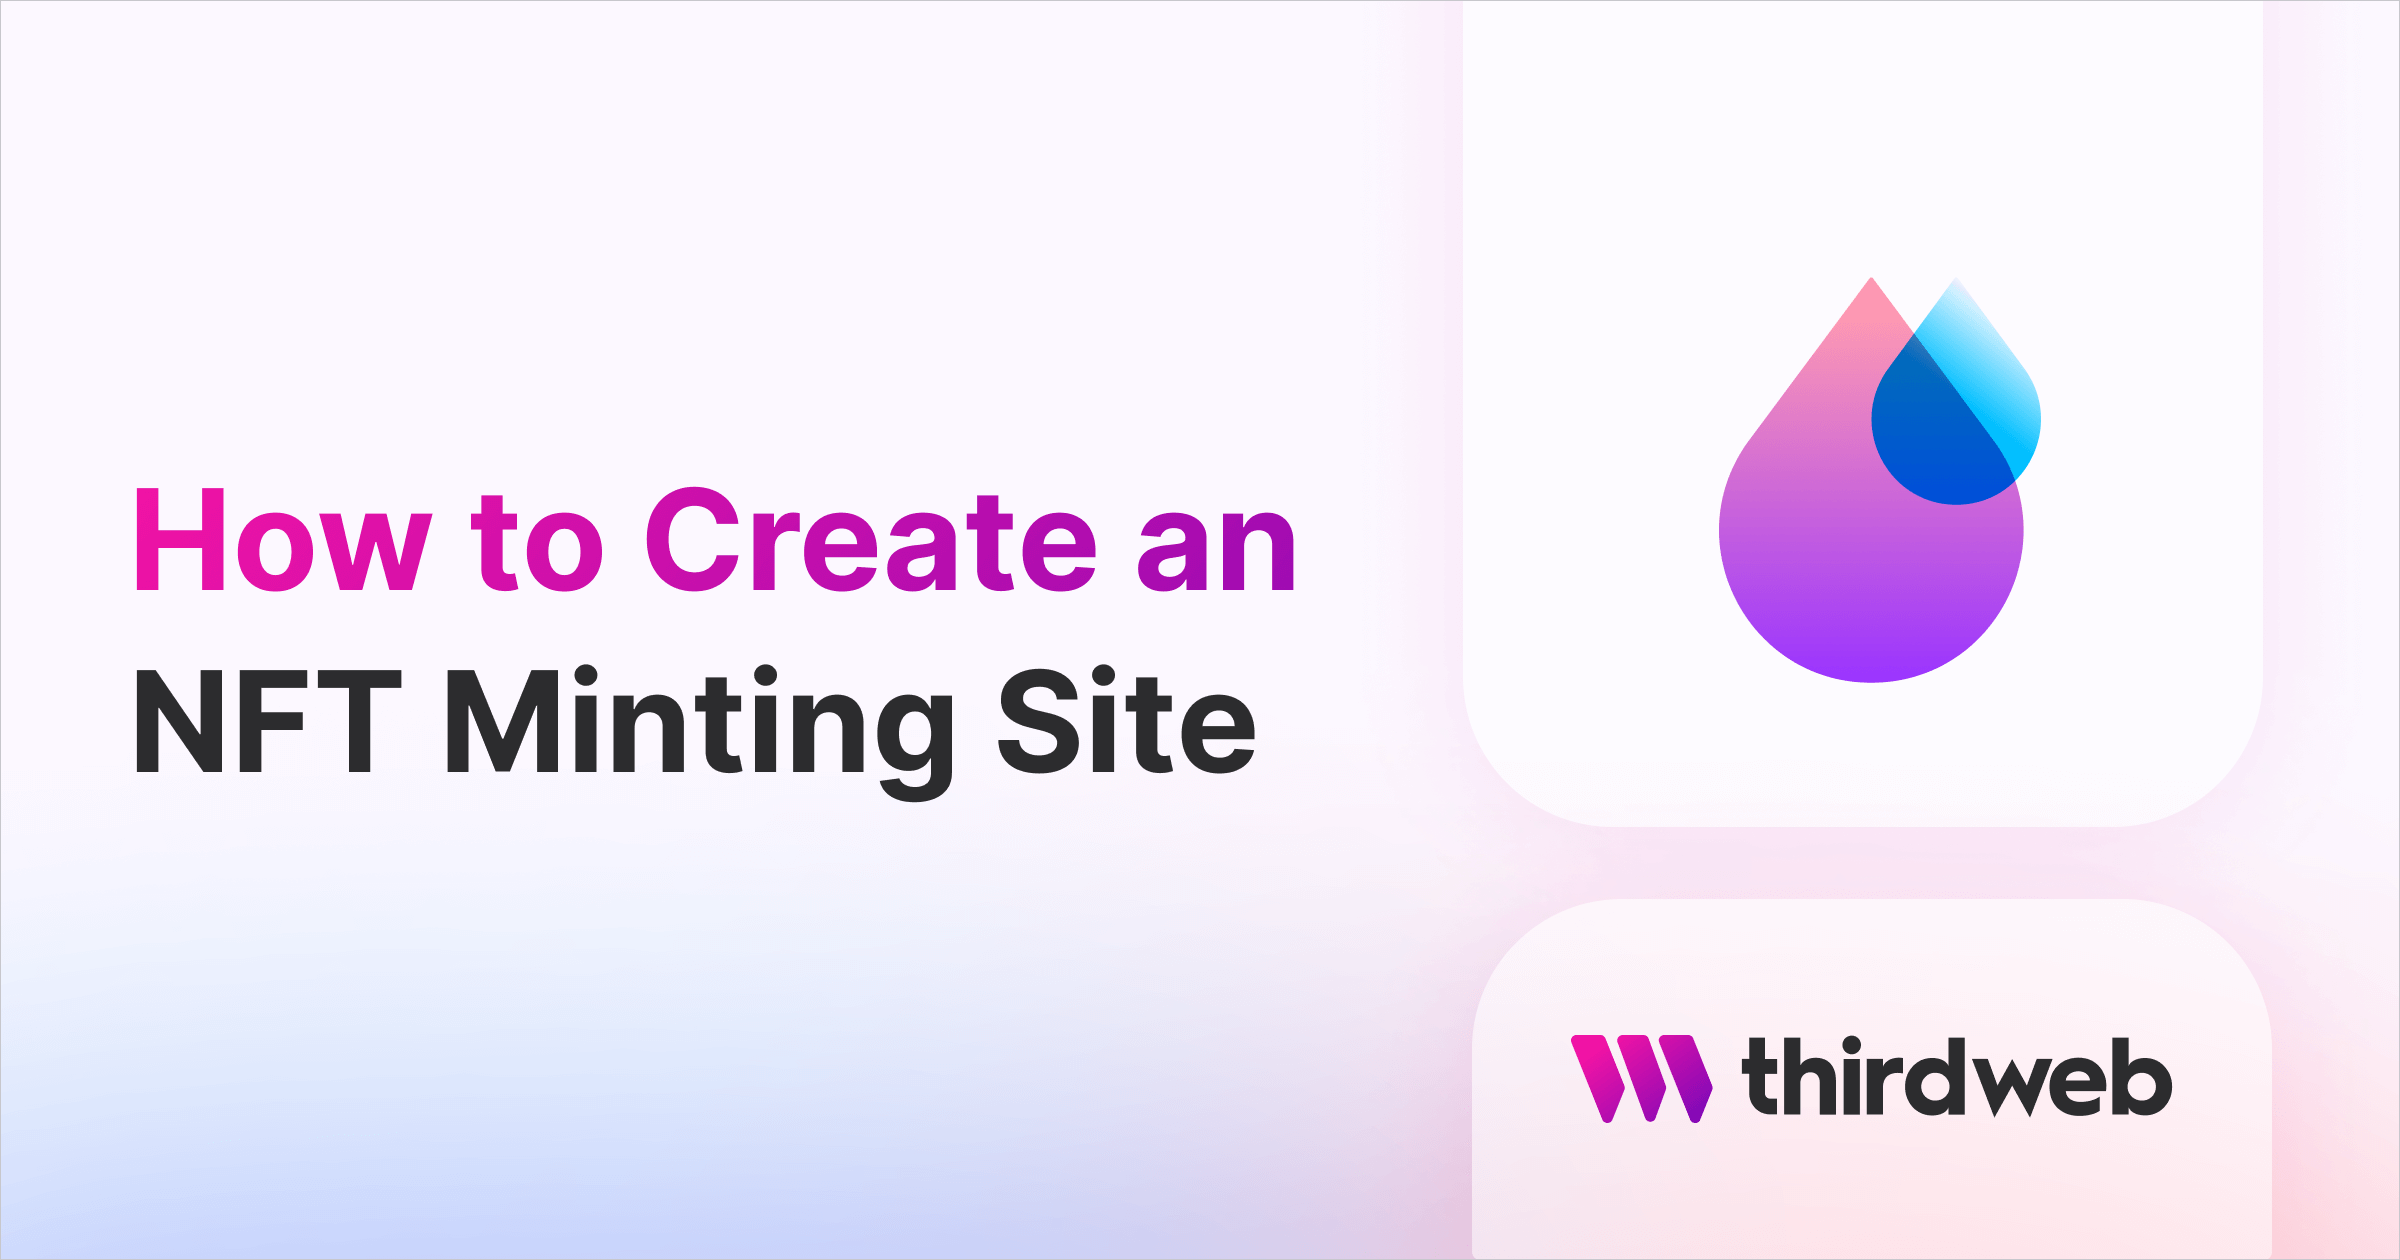 How to Create an NFT Minting Site